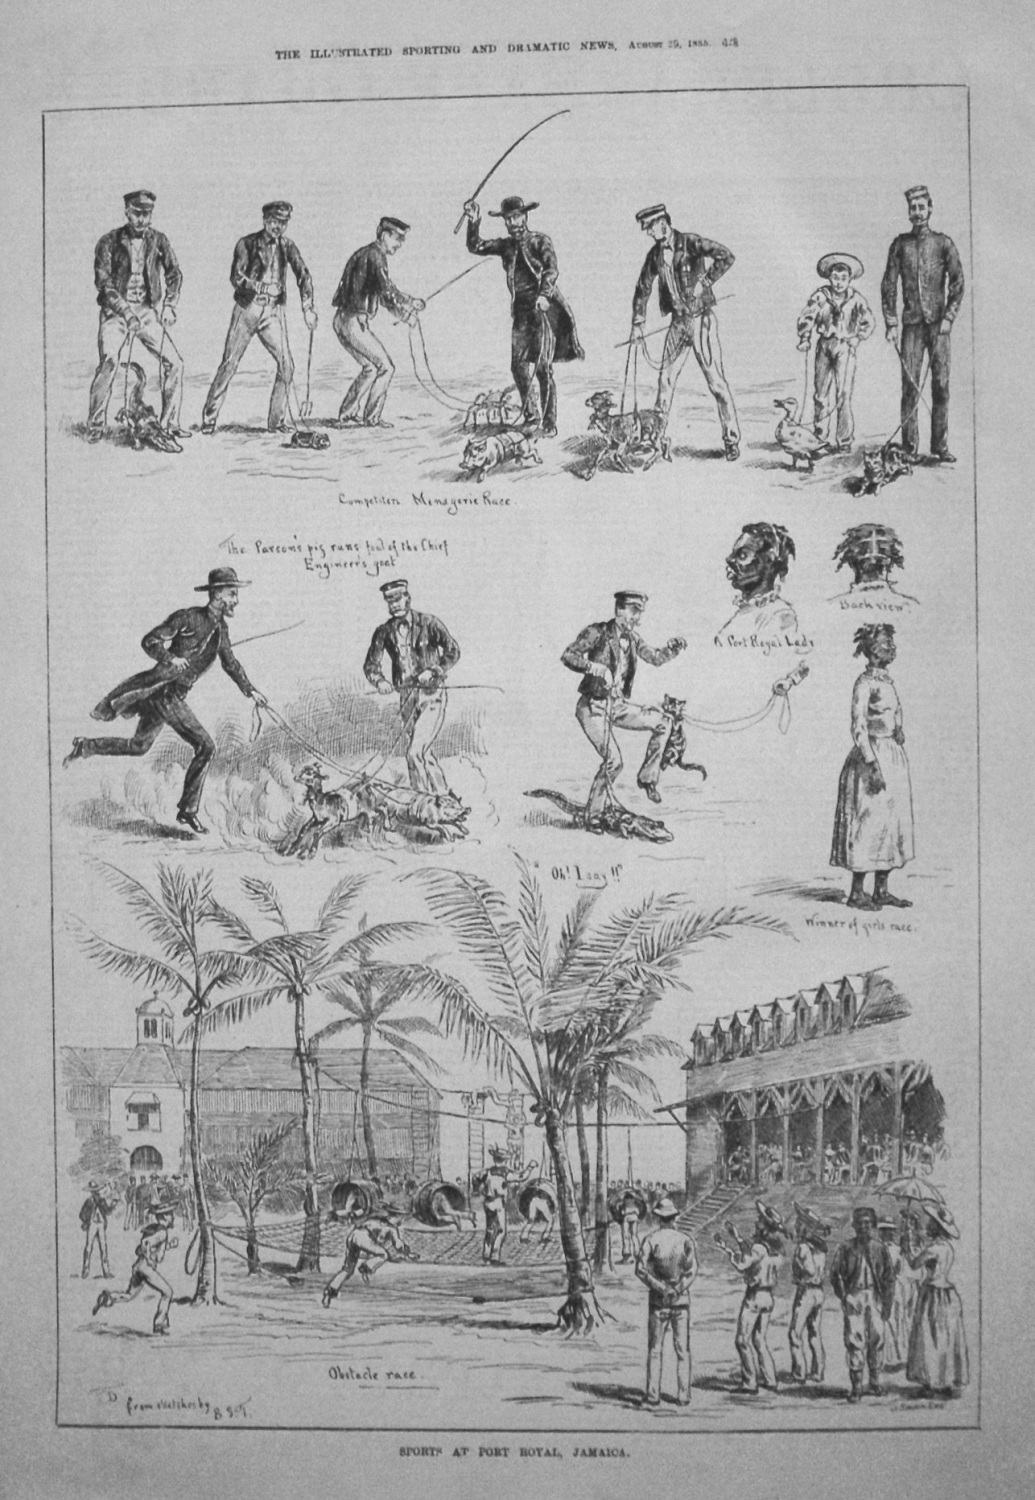 Sports at the Port Royal, Jamaica. 1885